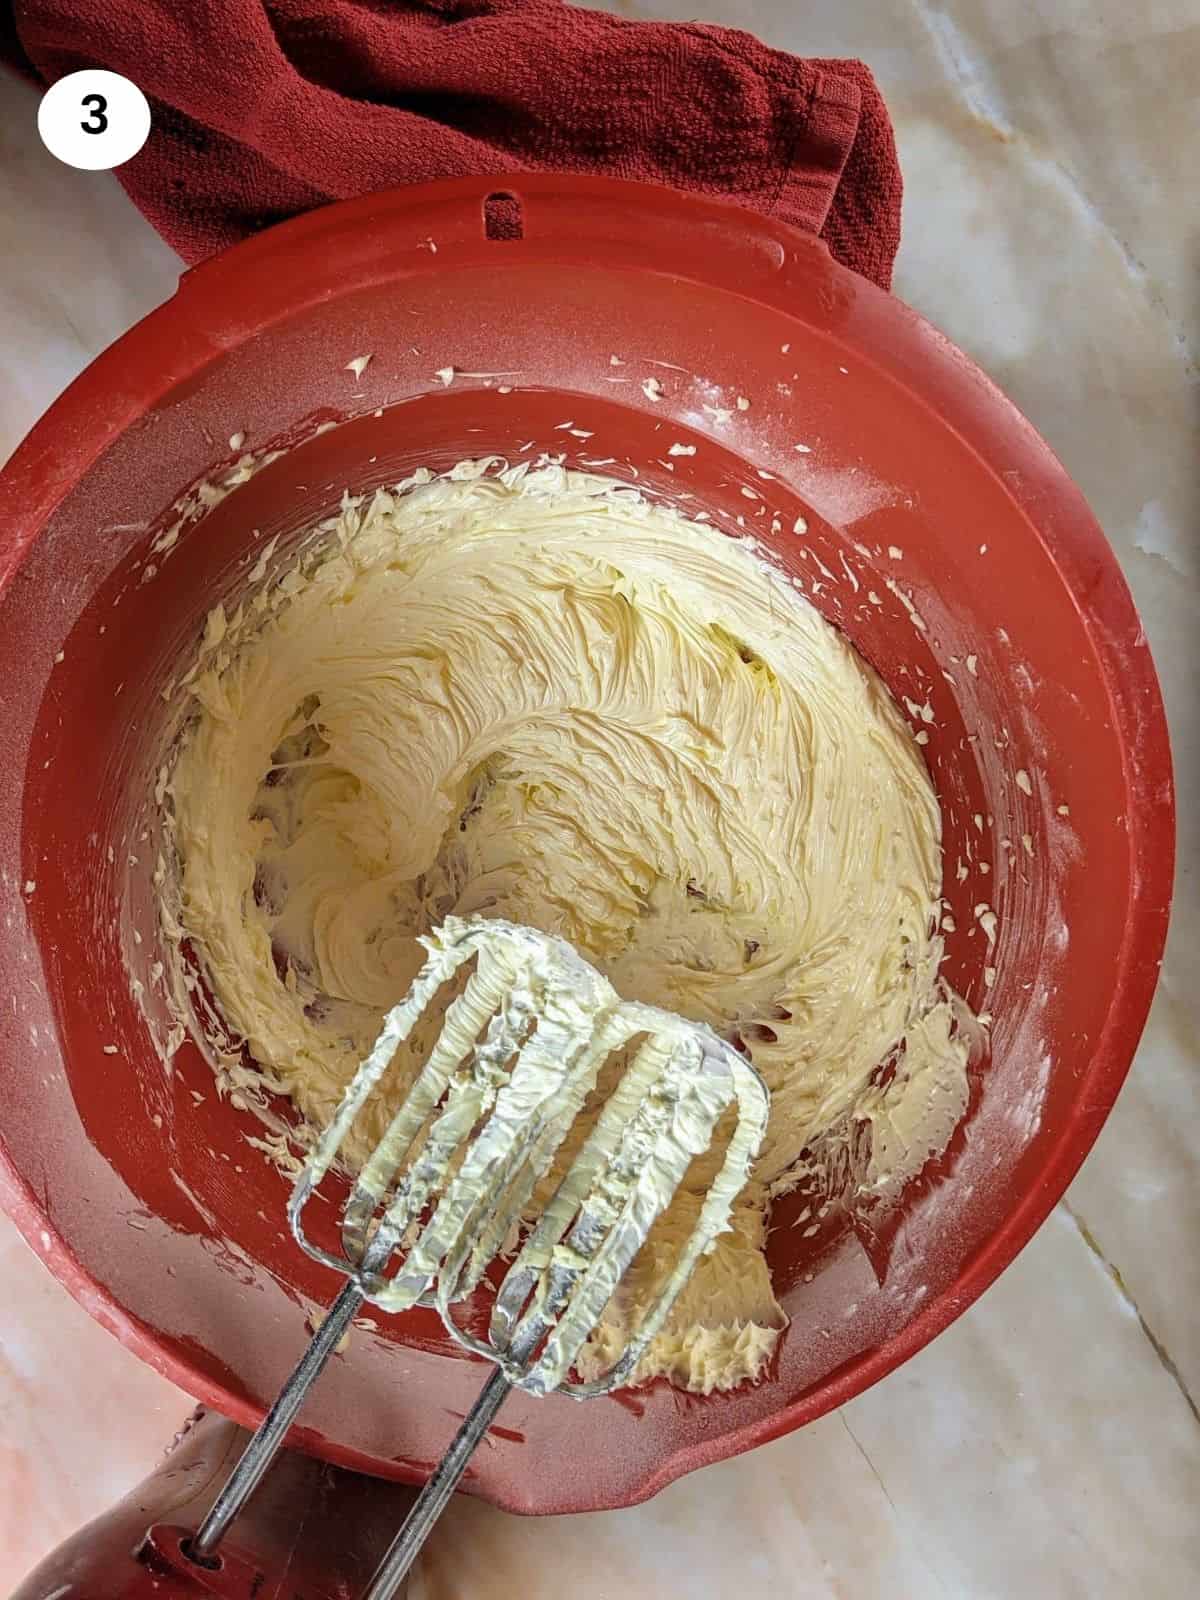 Mixing butter and sugar until light and fluffy